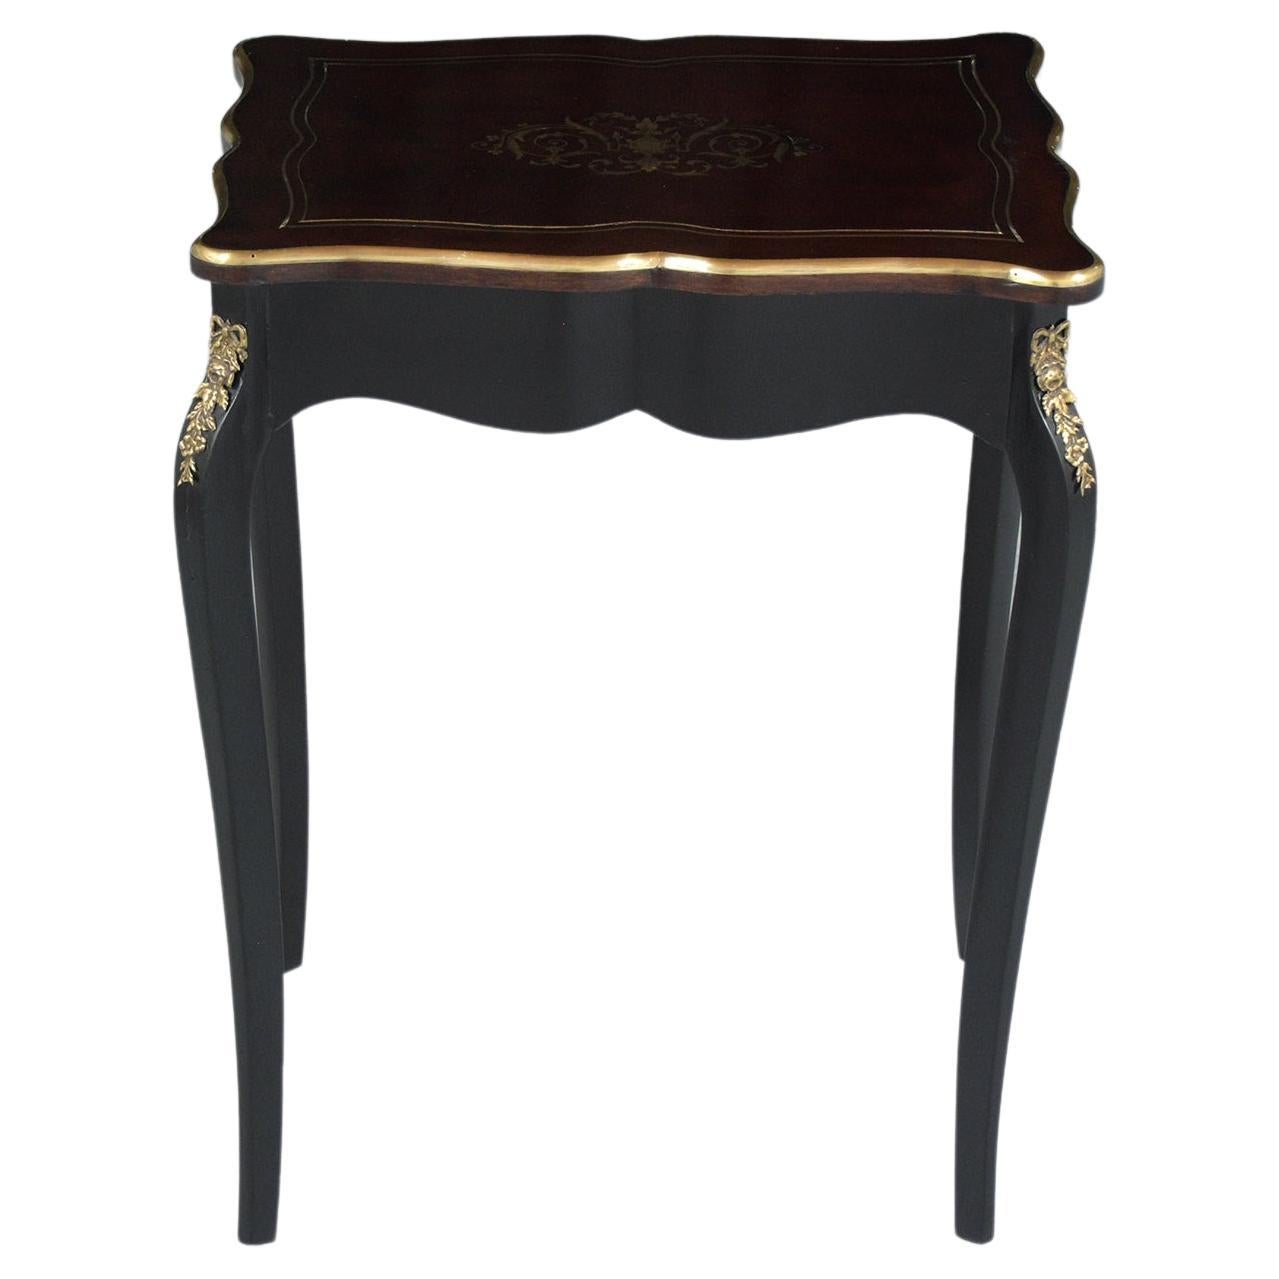 Indulge in the classic charm of French design with our exquisite Napoleon III style side table. Handcrafted by skilled artisans, this piece of furniture is a blend of traditional aesthetics and modern restoration. The wood construction boasts a